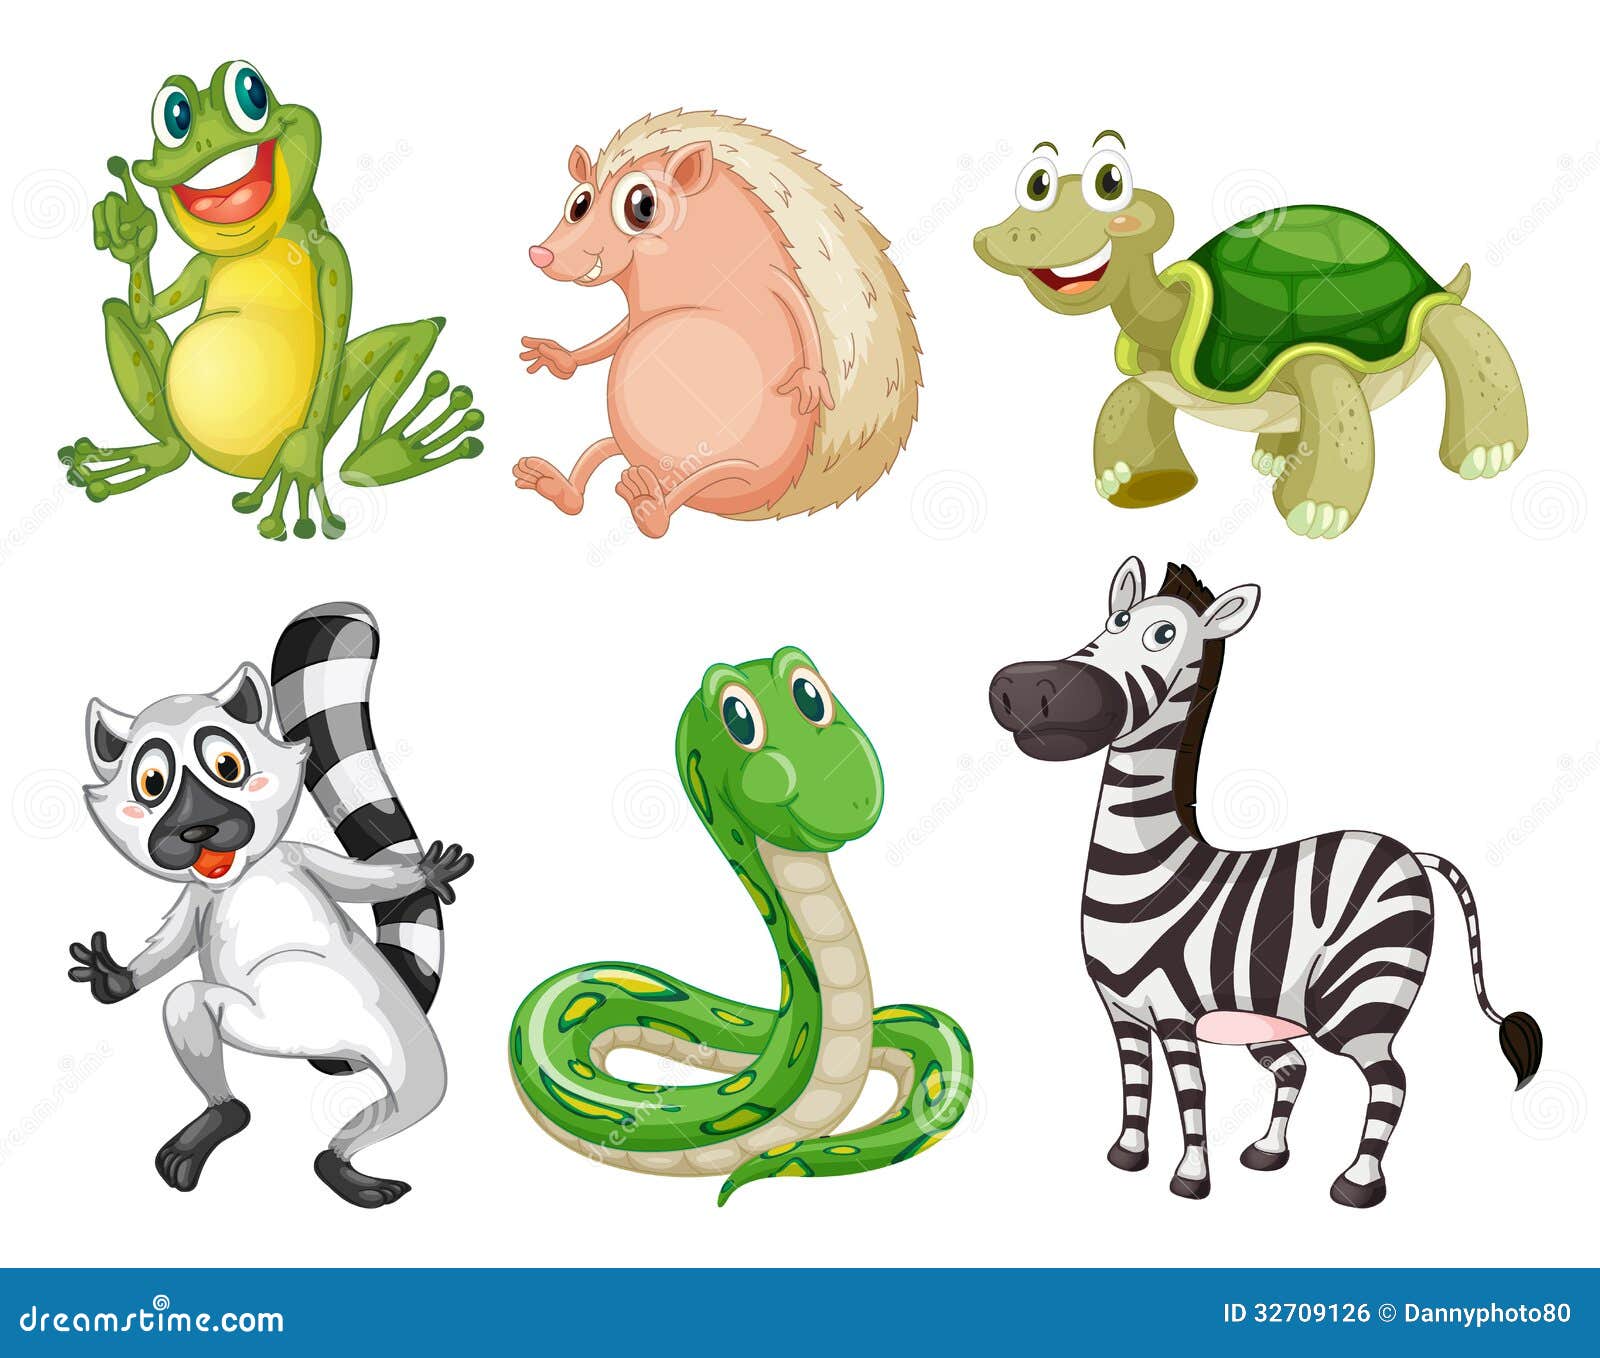 clipart of different animals - photo #6